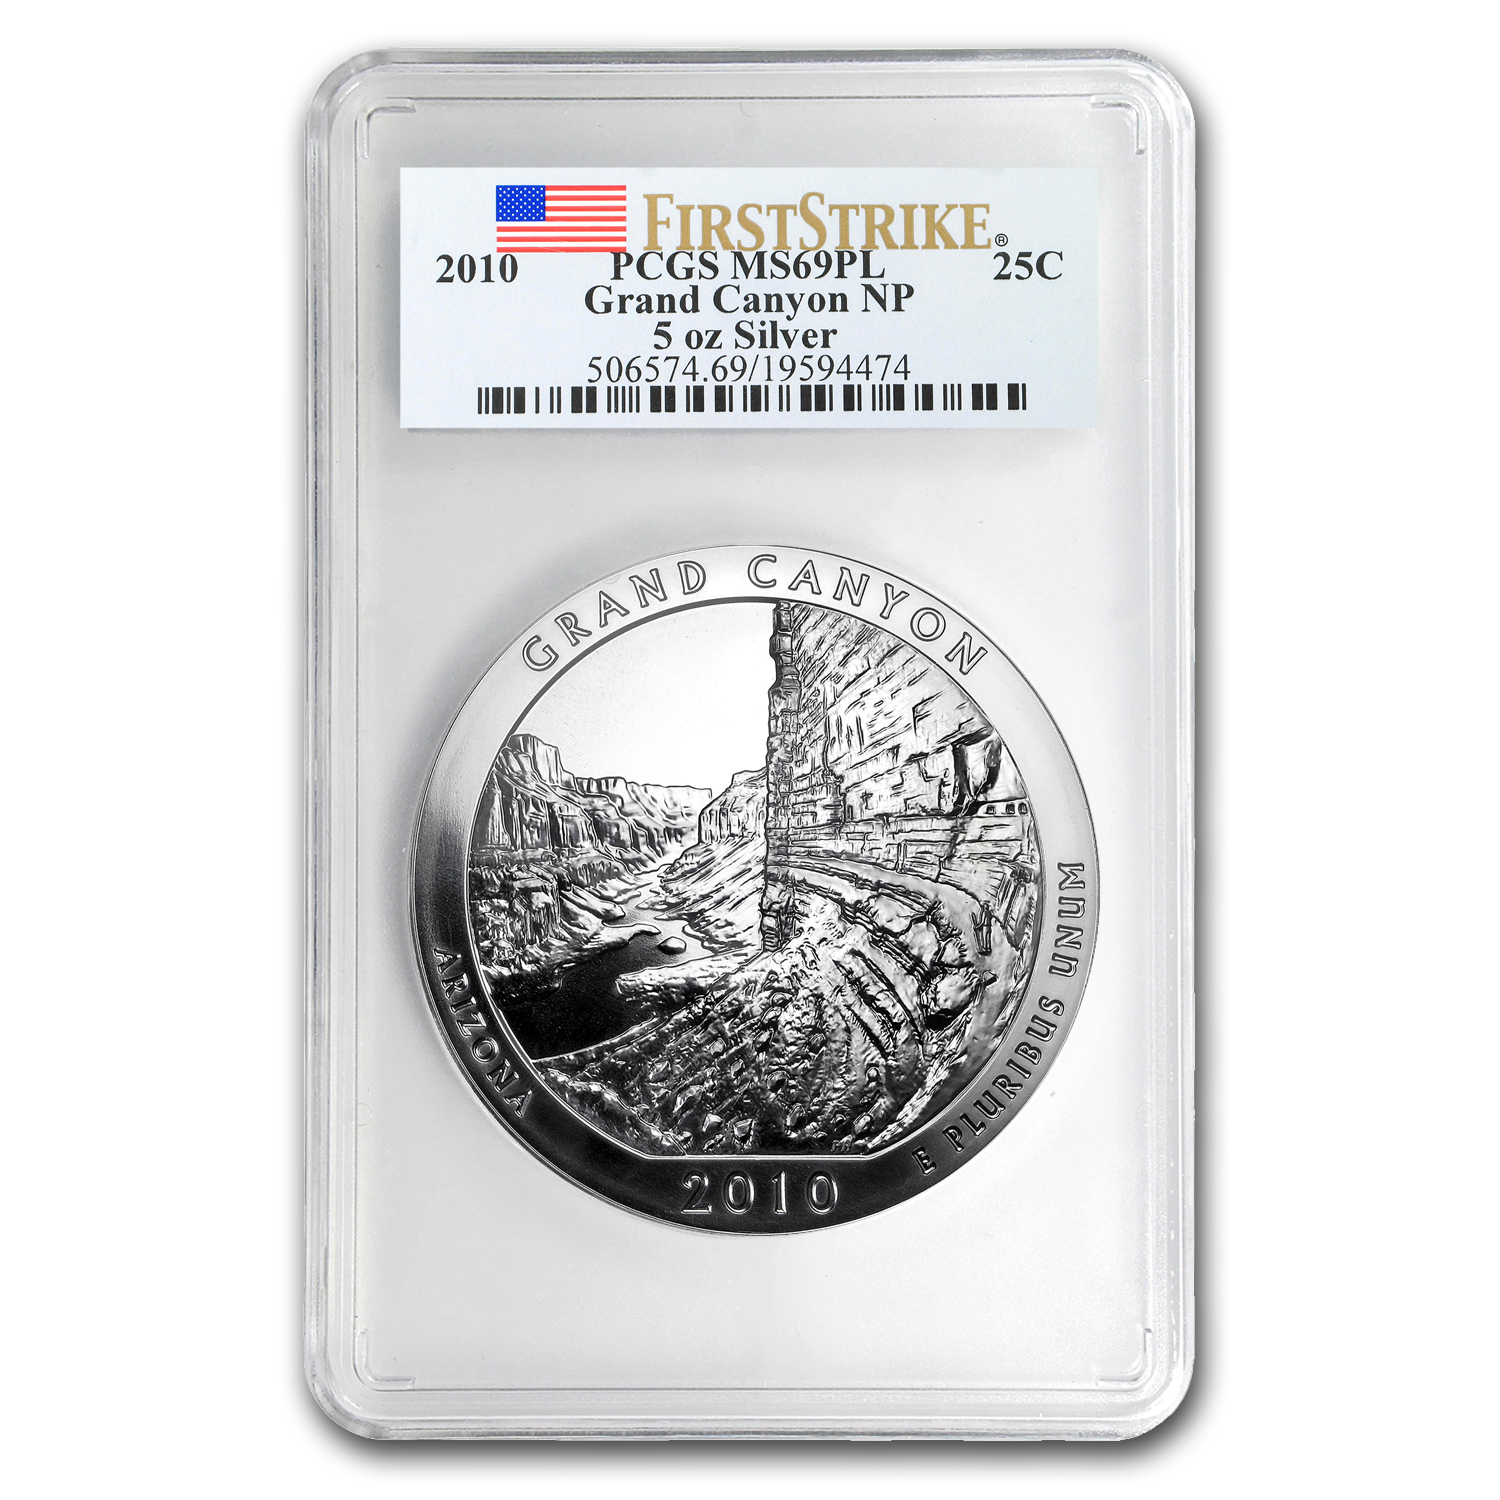 Buy 2010 5 oz Silver ATB Grand Canyon MS-69 PL PCGS (FirstStrike?)